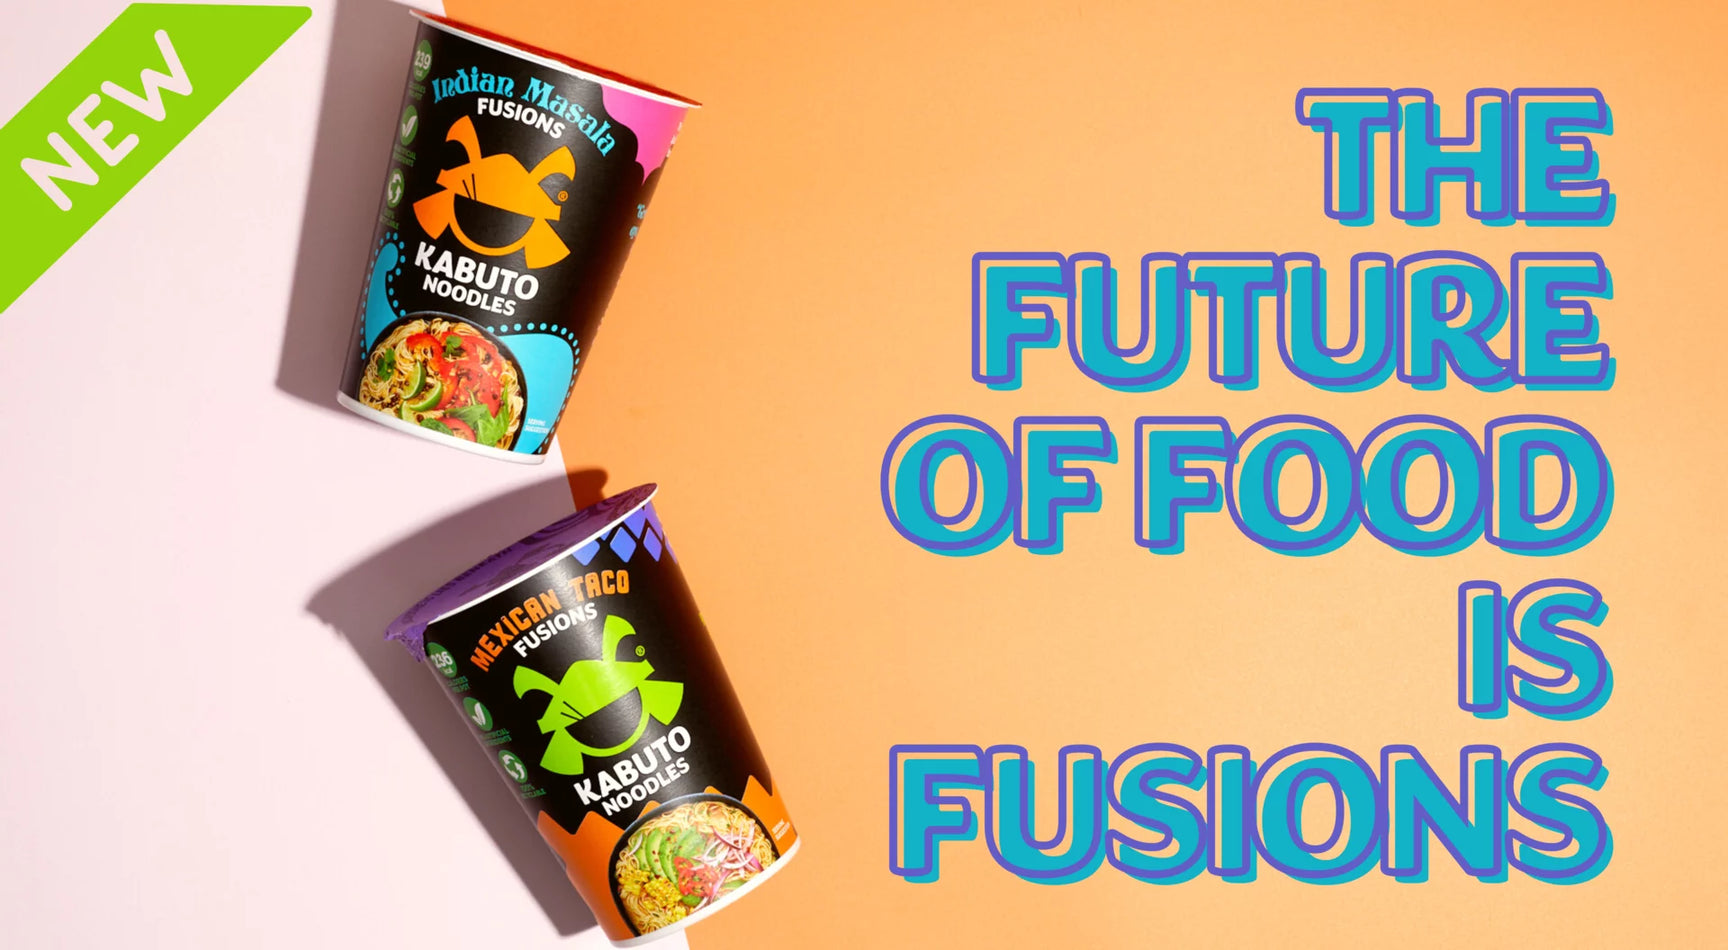 Fancy a new flavour? Fusions is the Future